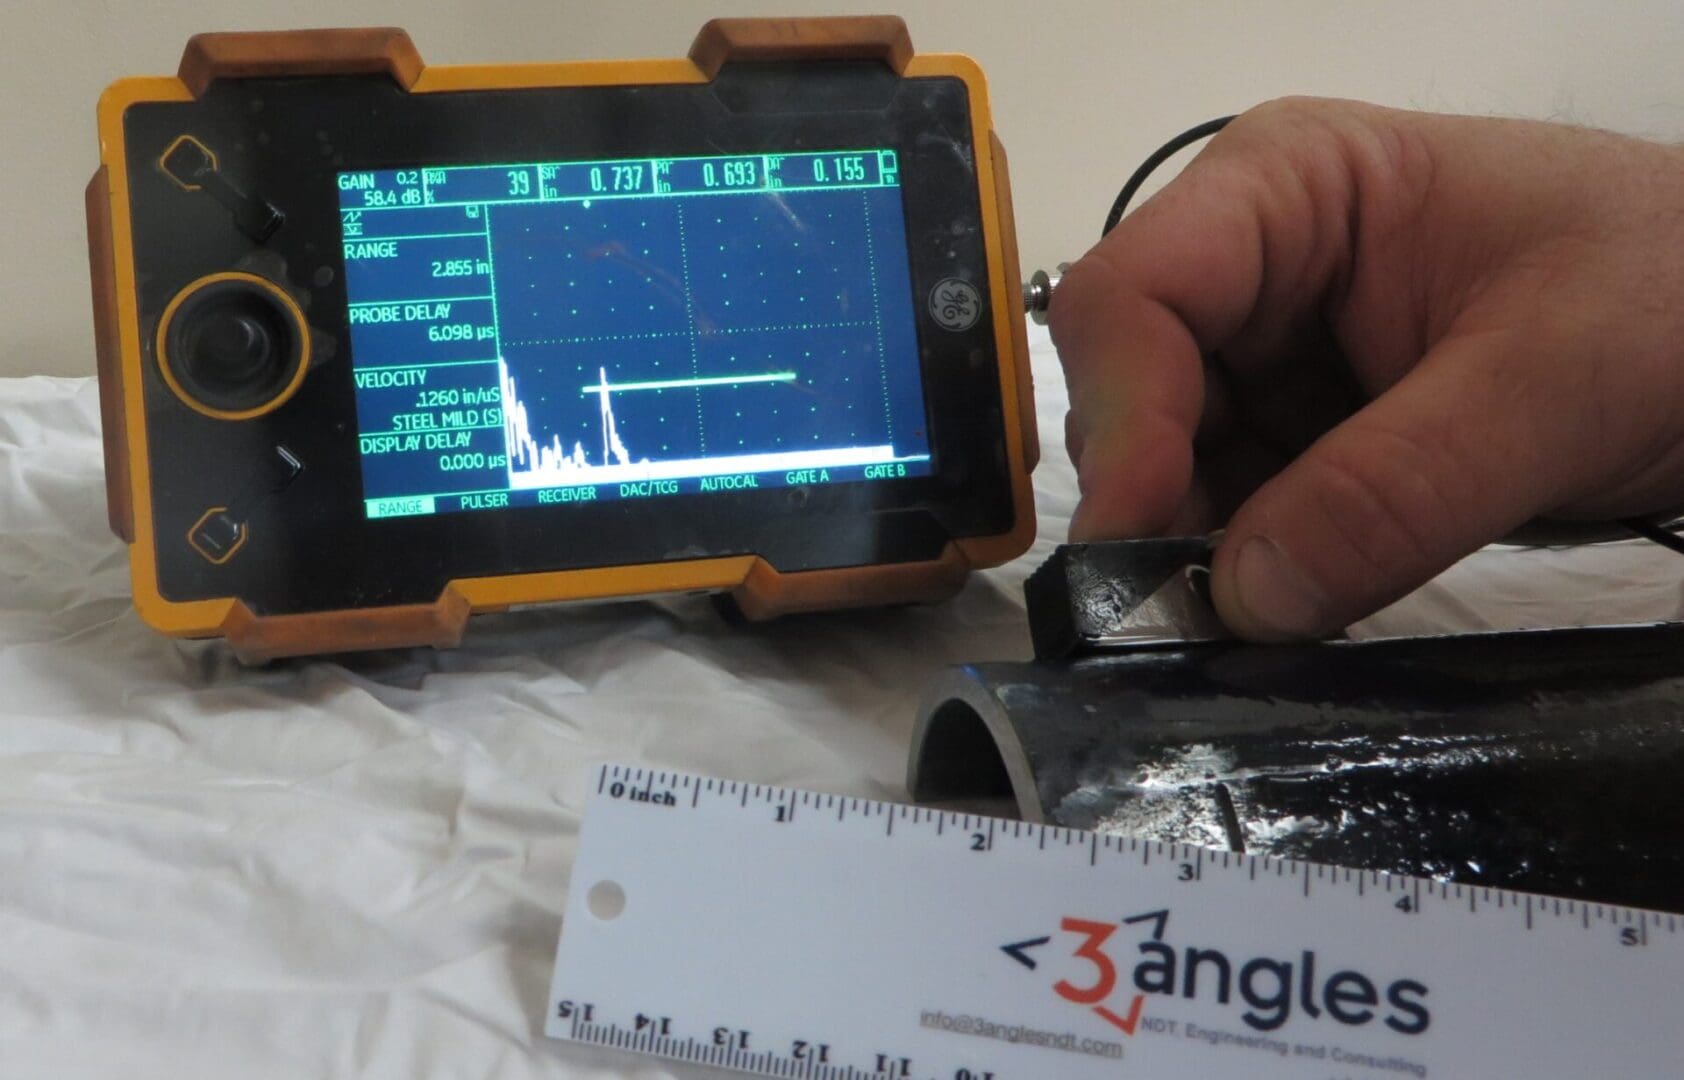 Ultrasonic Testing with a small device and scale